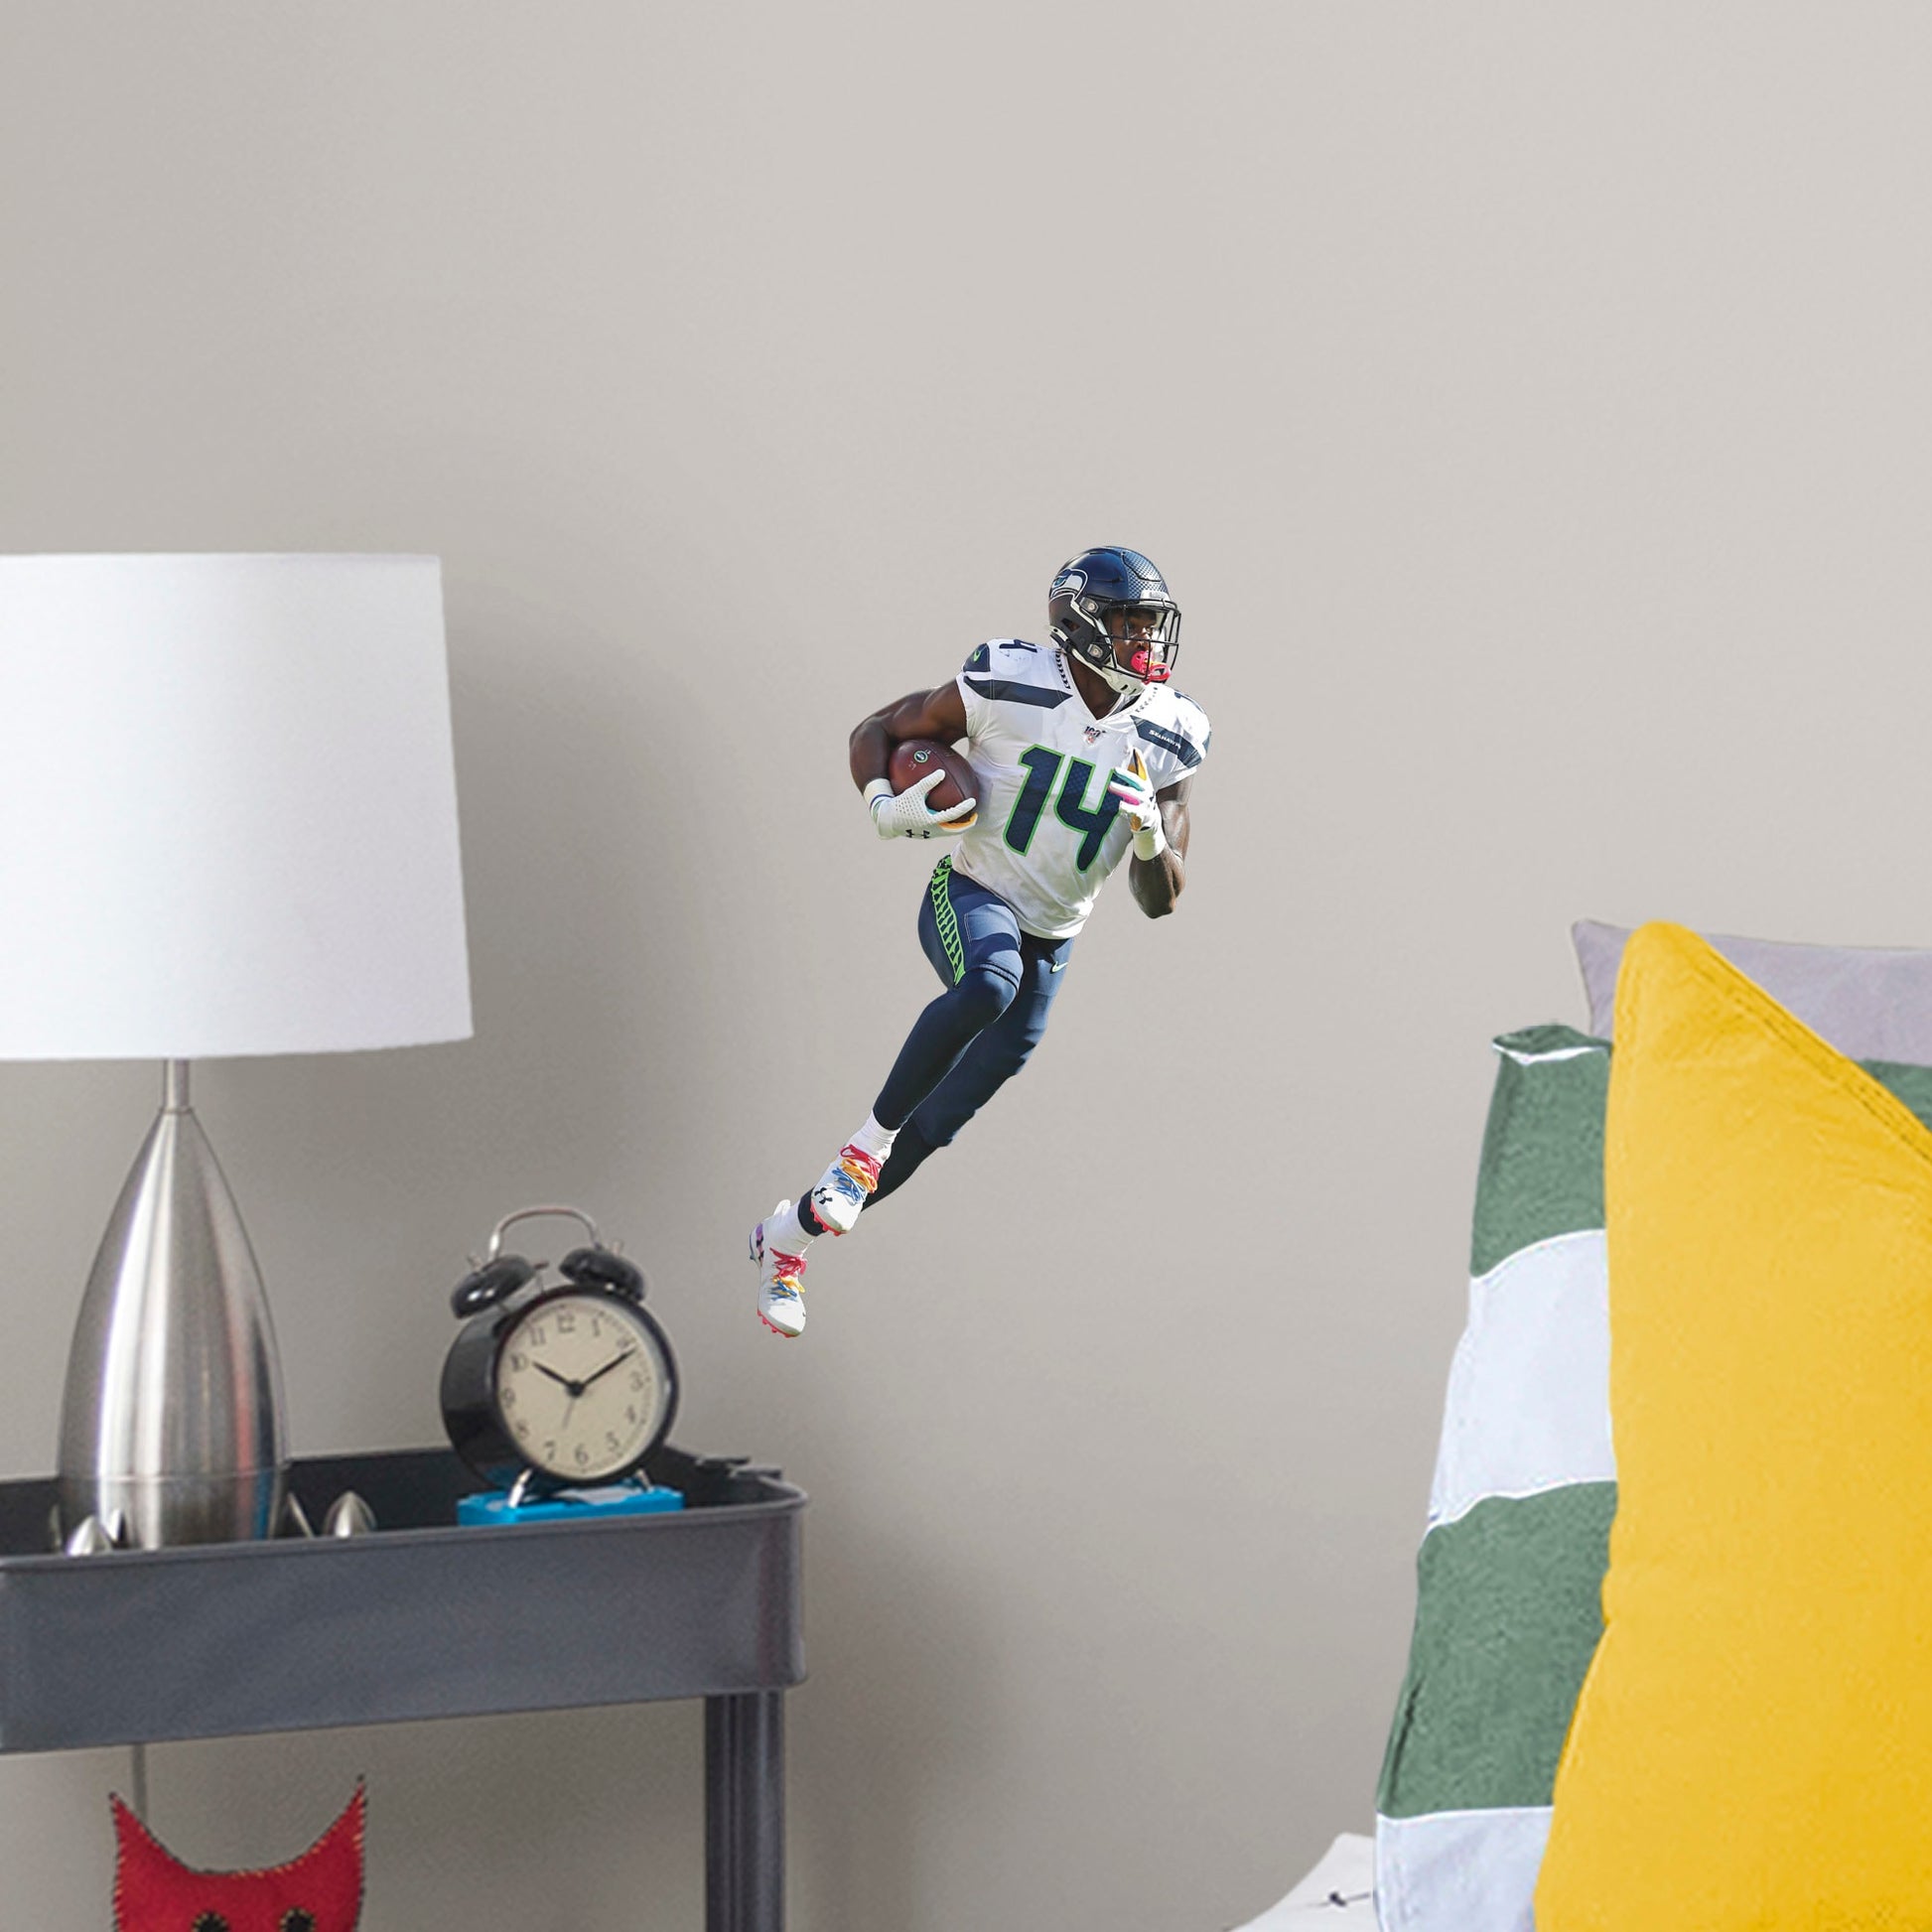 Large Athlete + 2 Decals (10"W x 16.5"H) Outmaneuver boring walls with this removable wall decal featuring D.K. Metcalf showing other players how to roll with it. This quality, giftable decal showcases Baby Bron in mid-sprint, clutching the football defensively while wearing the Seahawks' signature College Navy, Action Green, and Wolf Gray colors. This durable decal will help you demonstrate a strong offense in your bedroom, office, or entertainment room.